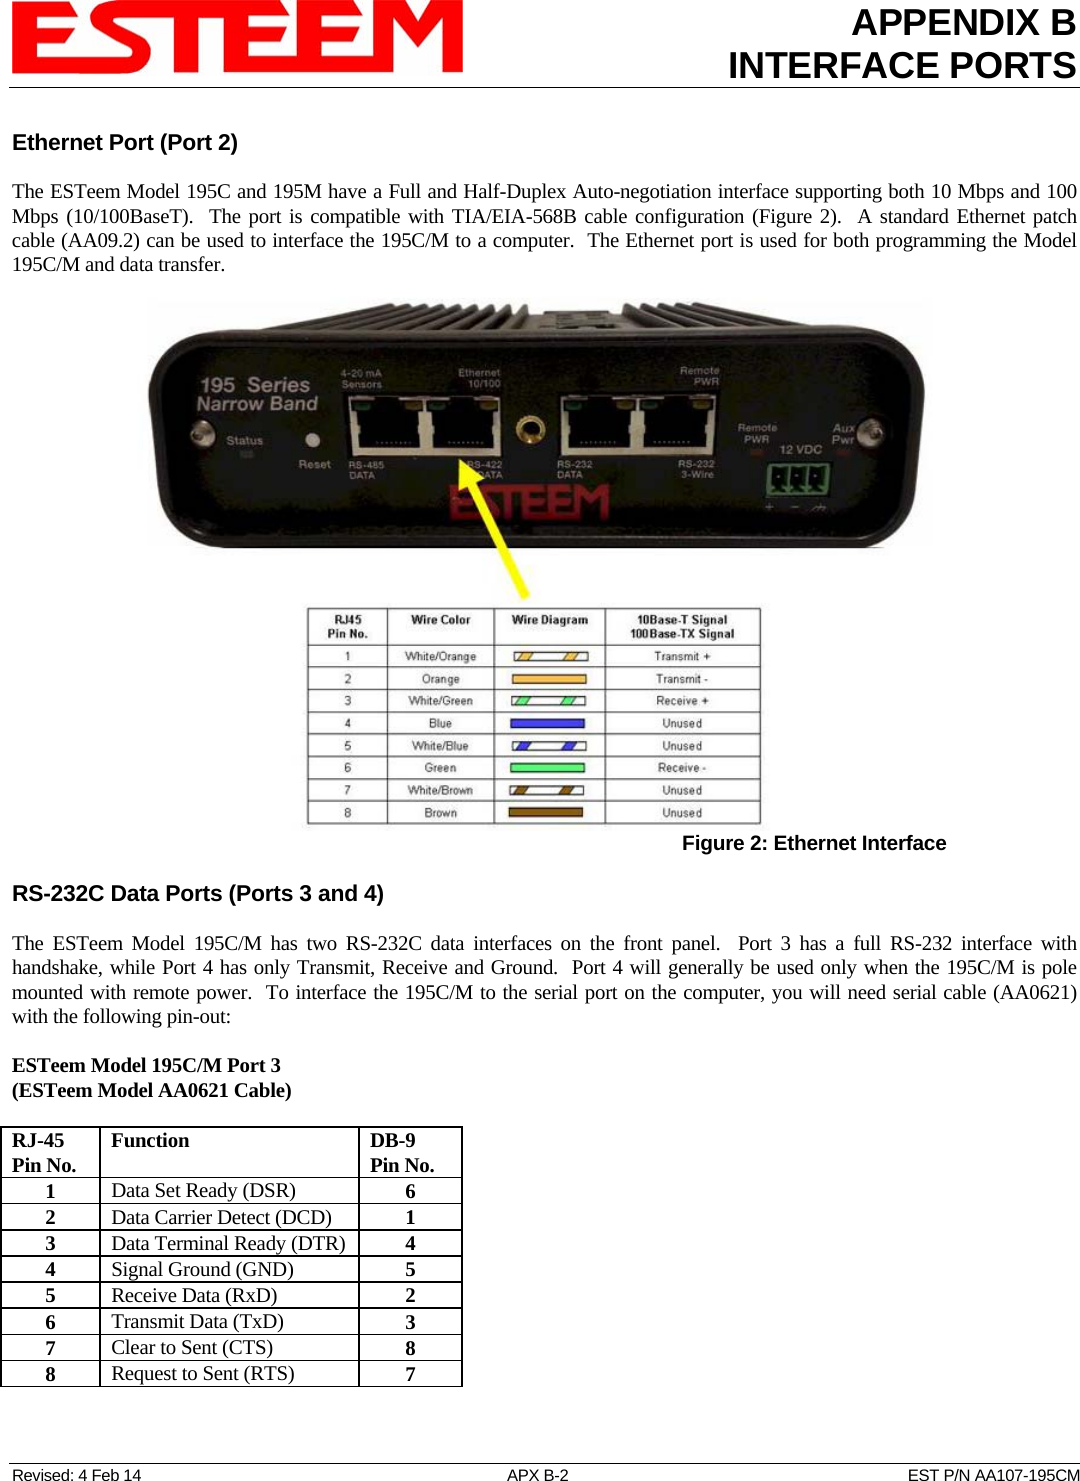 APPENDIX B INTERFACE PORTS   Revised: 4 Feb 14  APX B-2  EST P/N AA107-195CM Ethernet Port (Port 2)  The ESTeem Model 195C and 195M have a Full and Half-Duplex Auto-negotiation interface supporting both 10 Mbps and 100 Mbps (10/100BaseT).  The port is compatible with TIA/EIA-568B cable configuration (Figure 2).  A standard Ethernet patch cable (AA09.2) can be used to interface the 195C/M to a computer.  The Ethernet port is used for both programming the Model 195C/M and data transfer.  Figure 2: Ethernet Interface RS-232C Data Ports (Ports 3 and 4)  The ESTeem Model 195C/M has two RS-232C data interfaces on the front panel.  Port 3 has a full RS-232 interface with handshake, while Port 4 has only Transmit, Receive and Ground.  Port 4 will generally be used only when the 195C/M is pole mounted with remote power.  To interface the 195C/M to the serial port on the computer, you will need serial cable (AA0621) with the following pin-out:  ESTeem Model 195C/M Port 3 (ESTeem Model AA0621 Cable)  RJ-45 Pin No.  Function  DB-9 Pin No. 1  Data Set Ready (DSR)  6 2  Data Carrier Detect (DCD)  1 3  Data Terminal Ready (DTR)  4 4  Signal Ground (GND)  5 5  Receive Data (RxD)  2 6  Transmit Data (TxD)  3 7  Clear to Sent (CTS)  8 8  Request to Sent (RTS)  7  